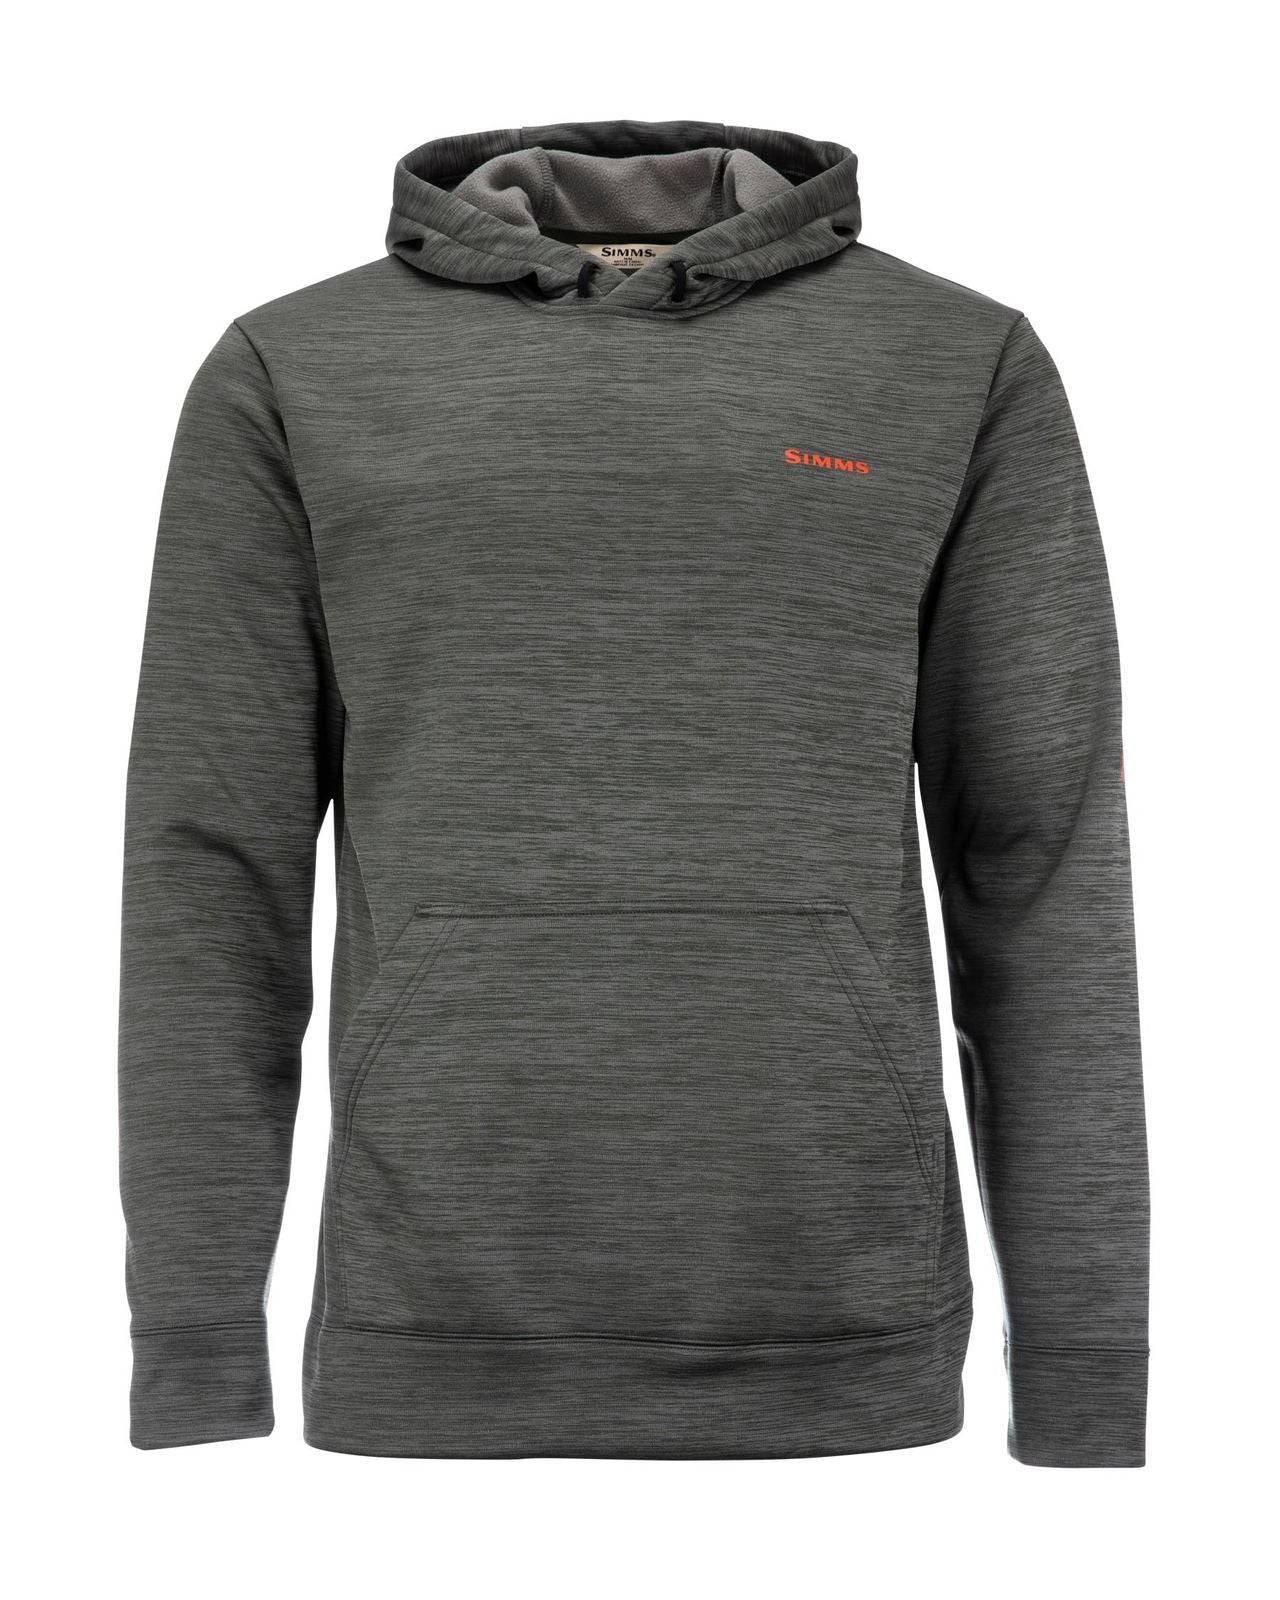 SIMMS CHALLENGER HOODY FOLIAGE HEATHER